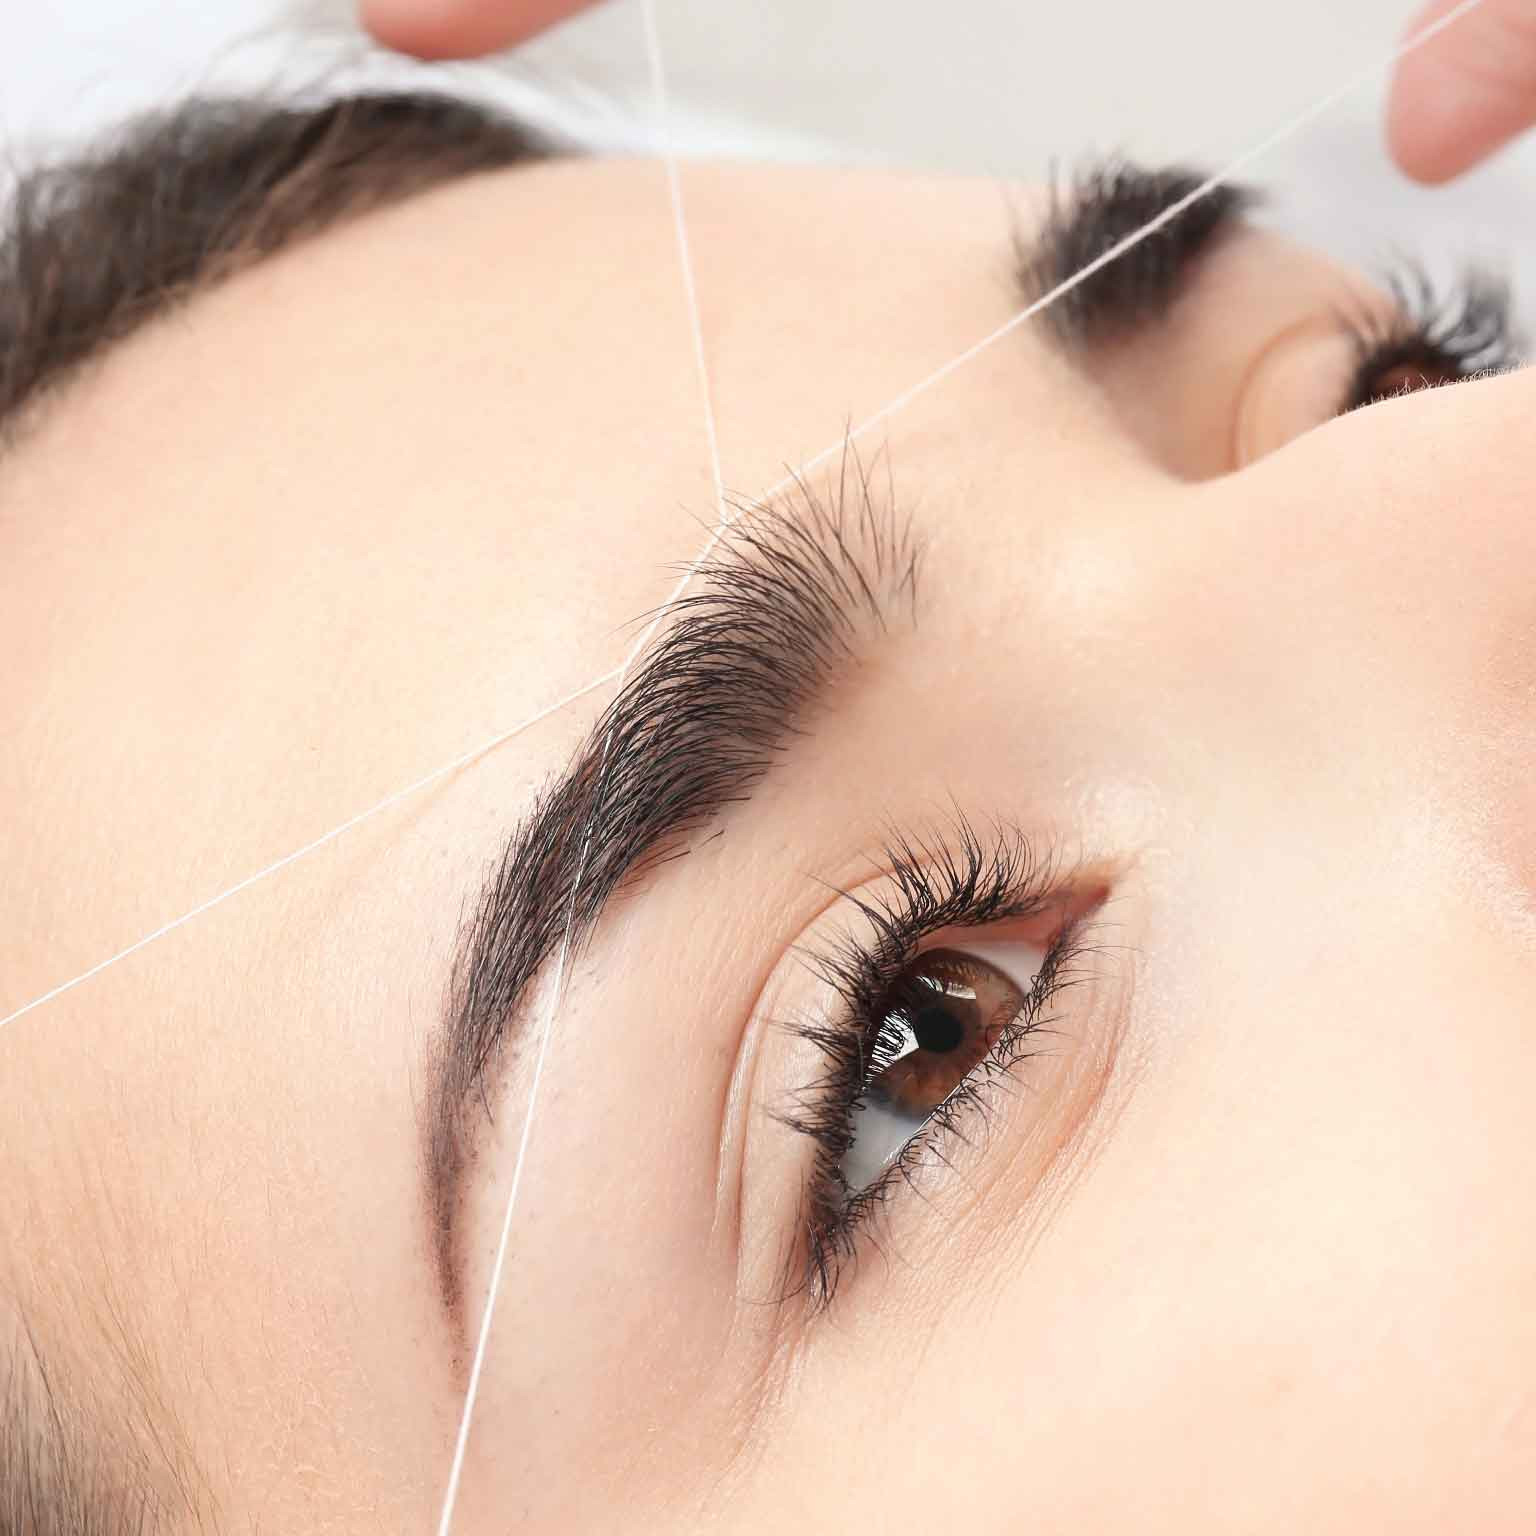 10 Steps To Perfect Eyebrow Threading At Home | Review Mentor